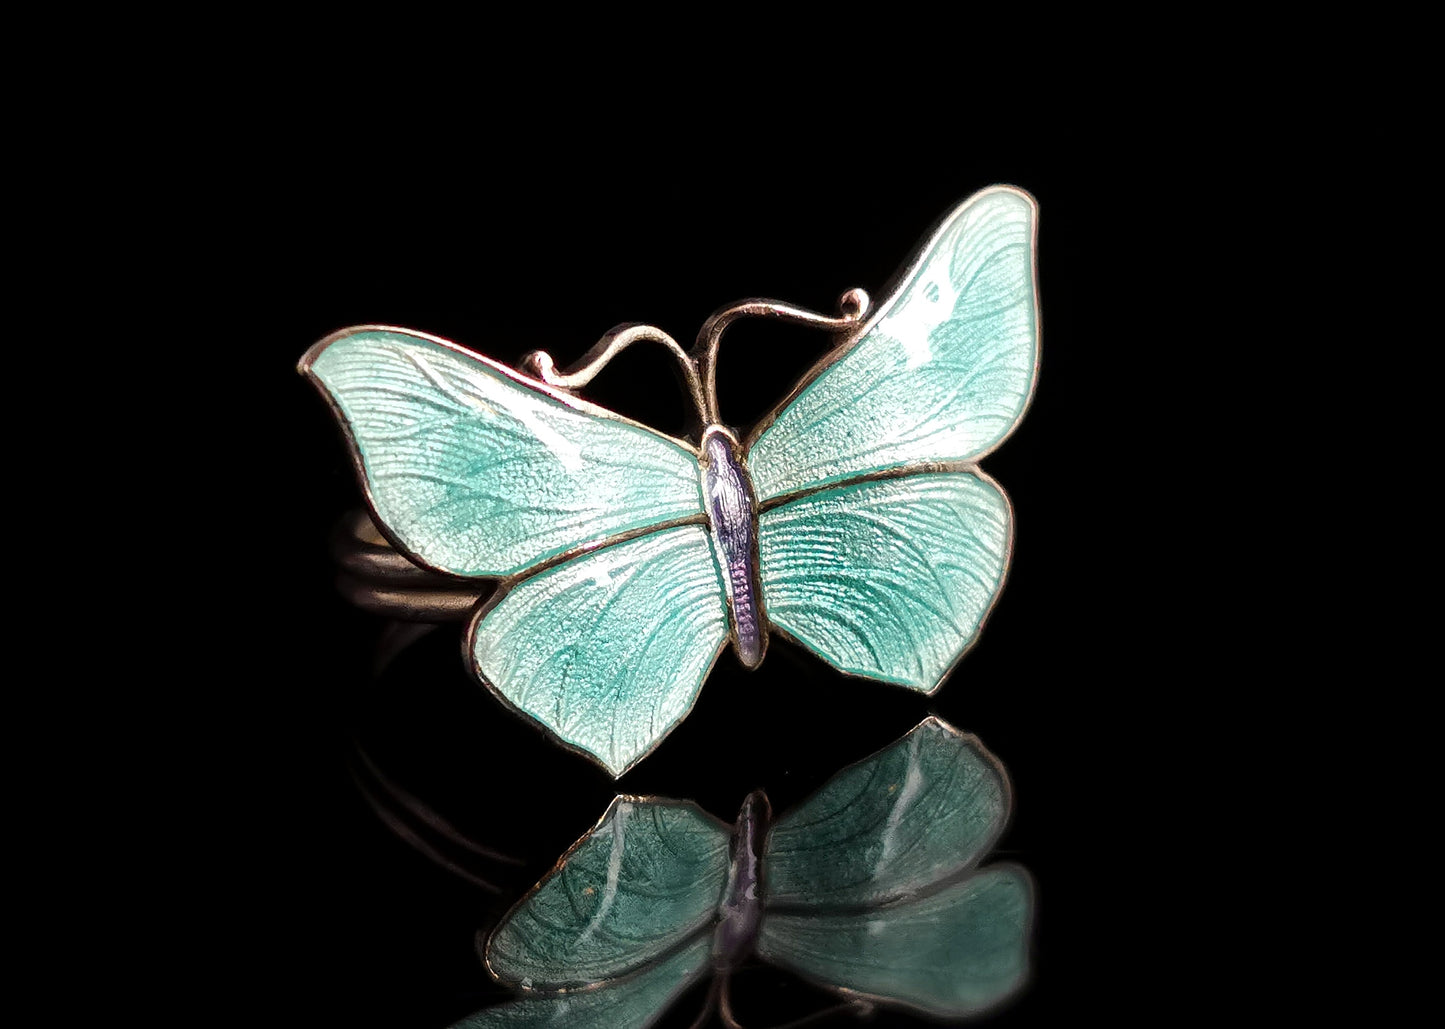 Antique Art Deco Silver and Guilloche enamel Butterfly ring